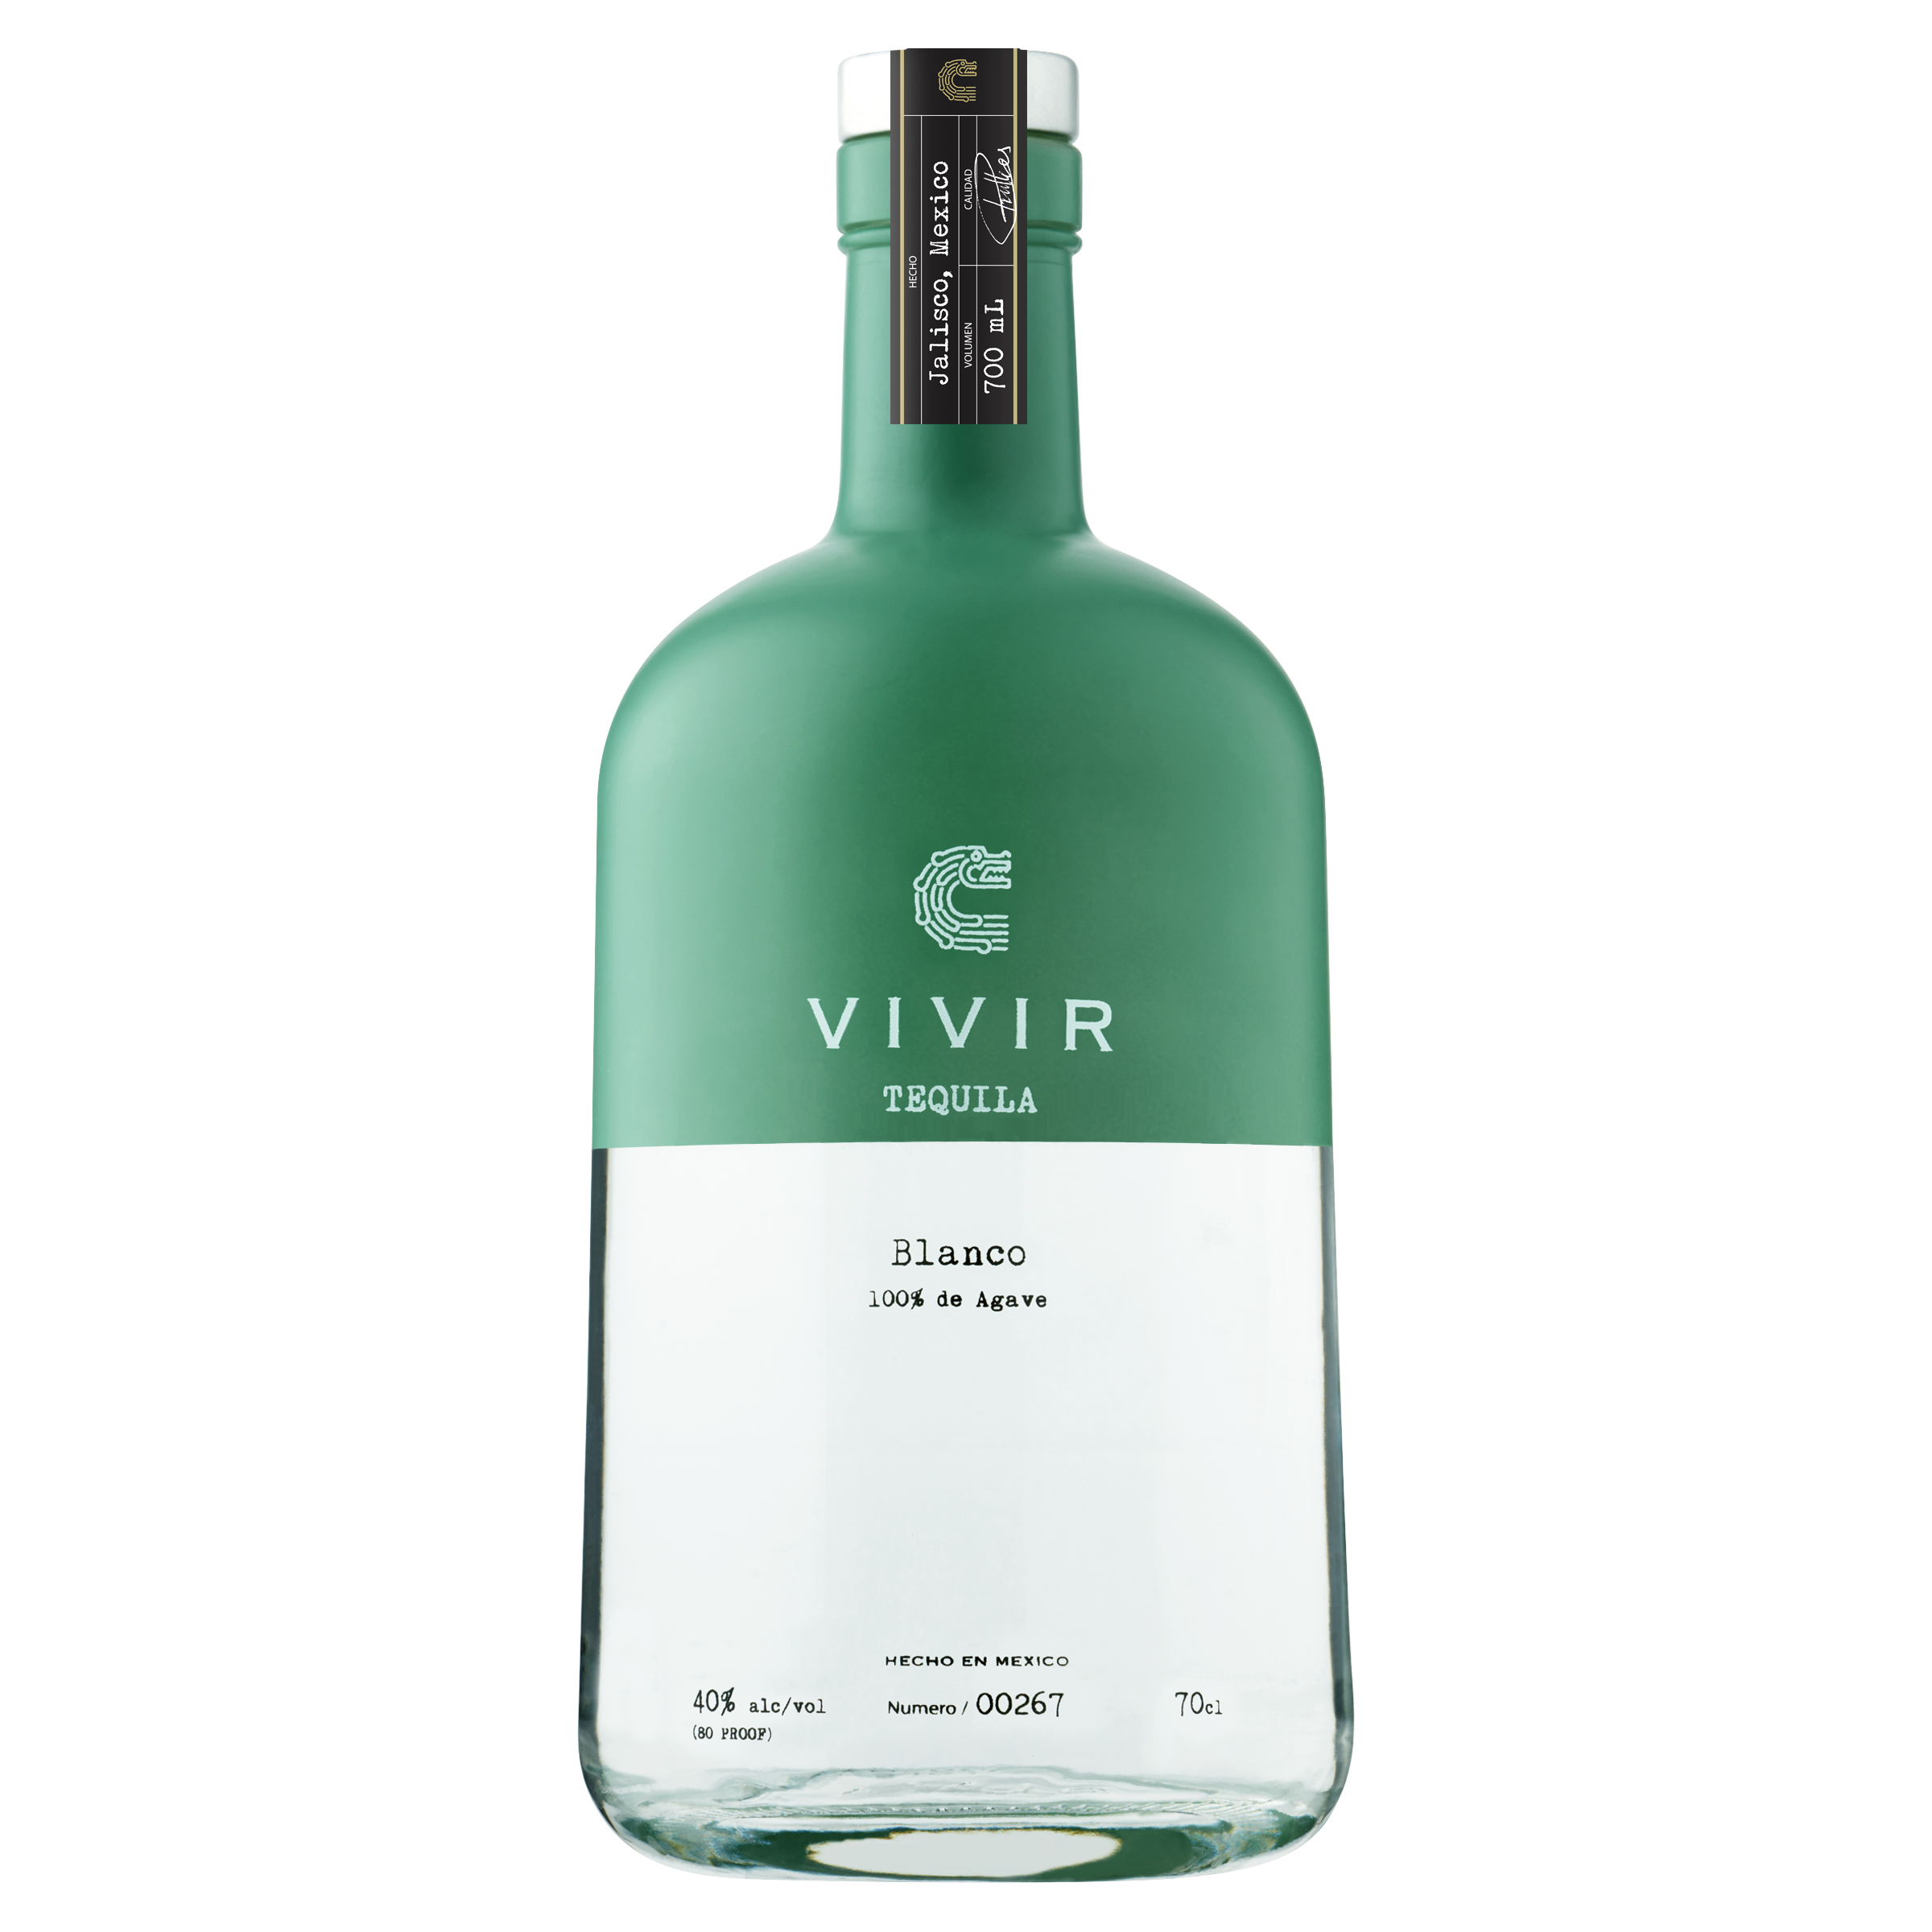 A bottle of VIVIR Tequila Blanco. The top half of the bottle is a teal green colour and displays the VIVIR Tequila logo, the bottom half of the bottle is transparent and shows the clear colourless Tequila inside.